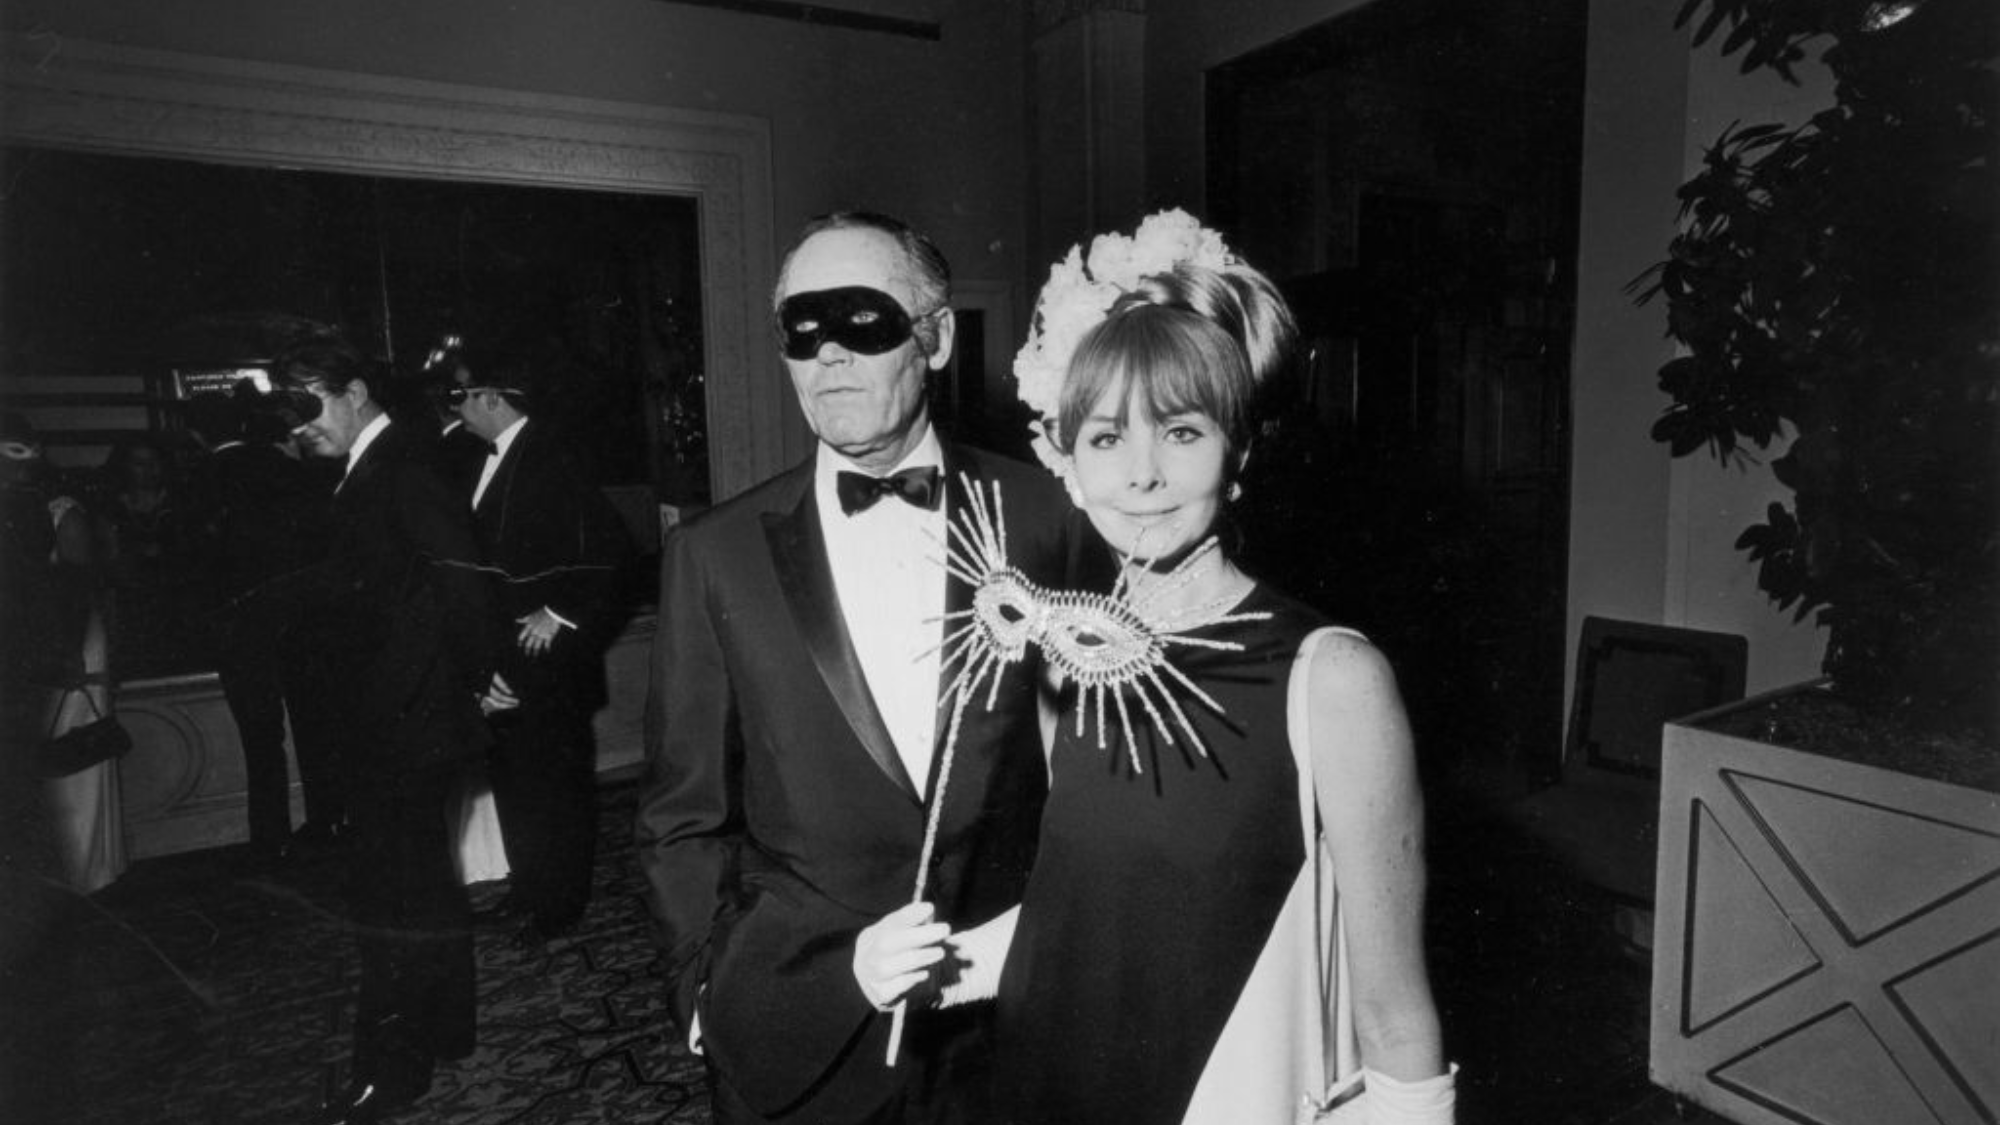 Henry Fonda and his wife Shirlee Mae Adams at the black and white ball in 1966, both carrying eye masks